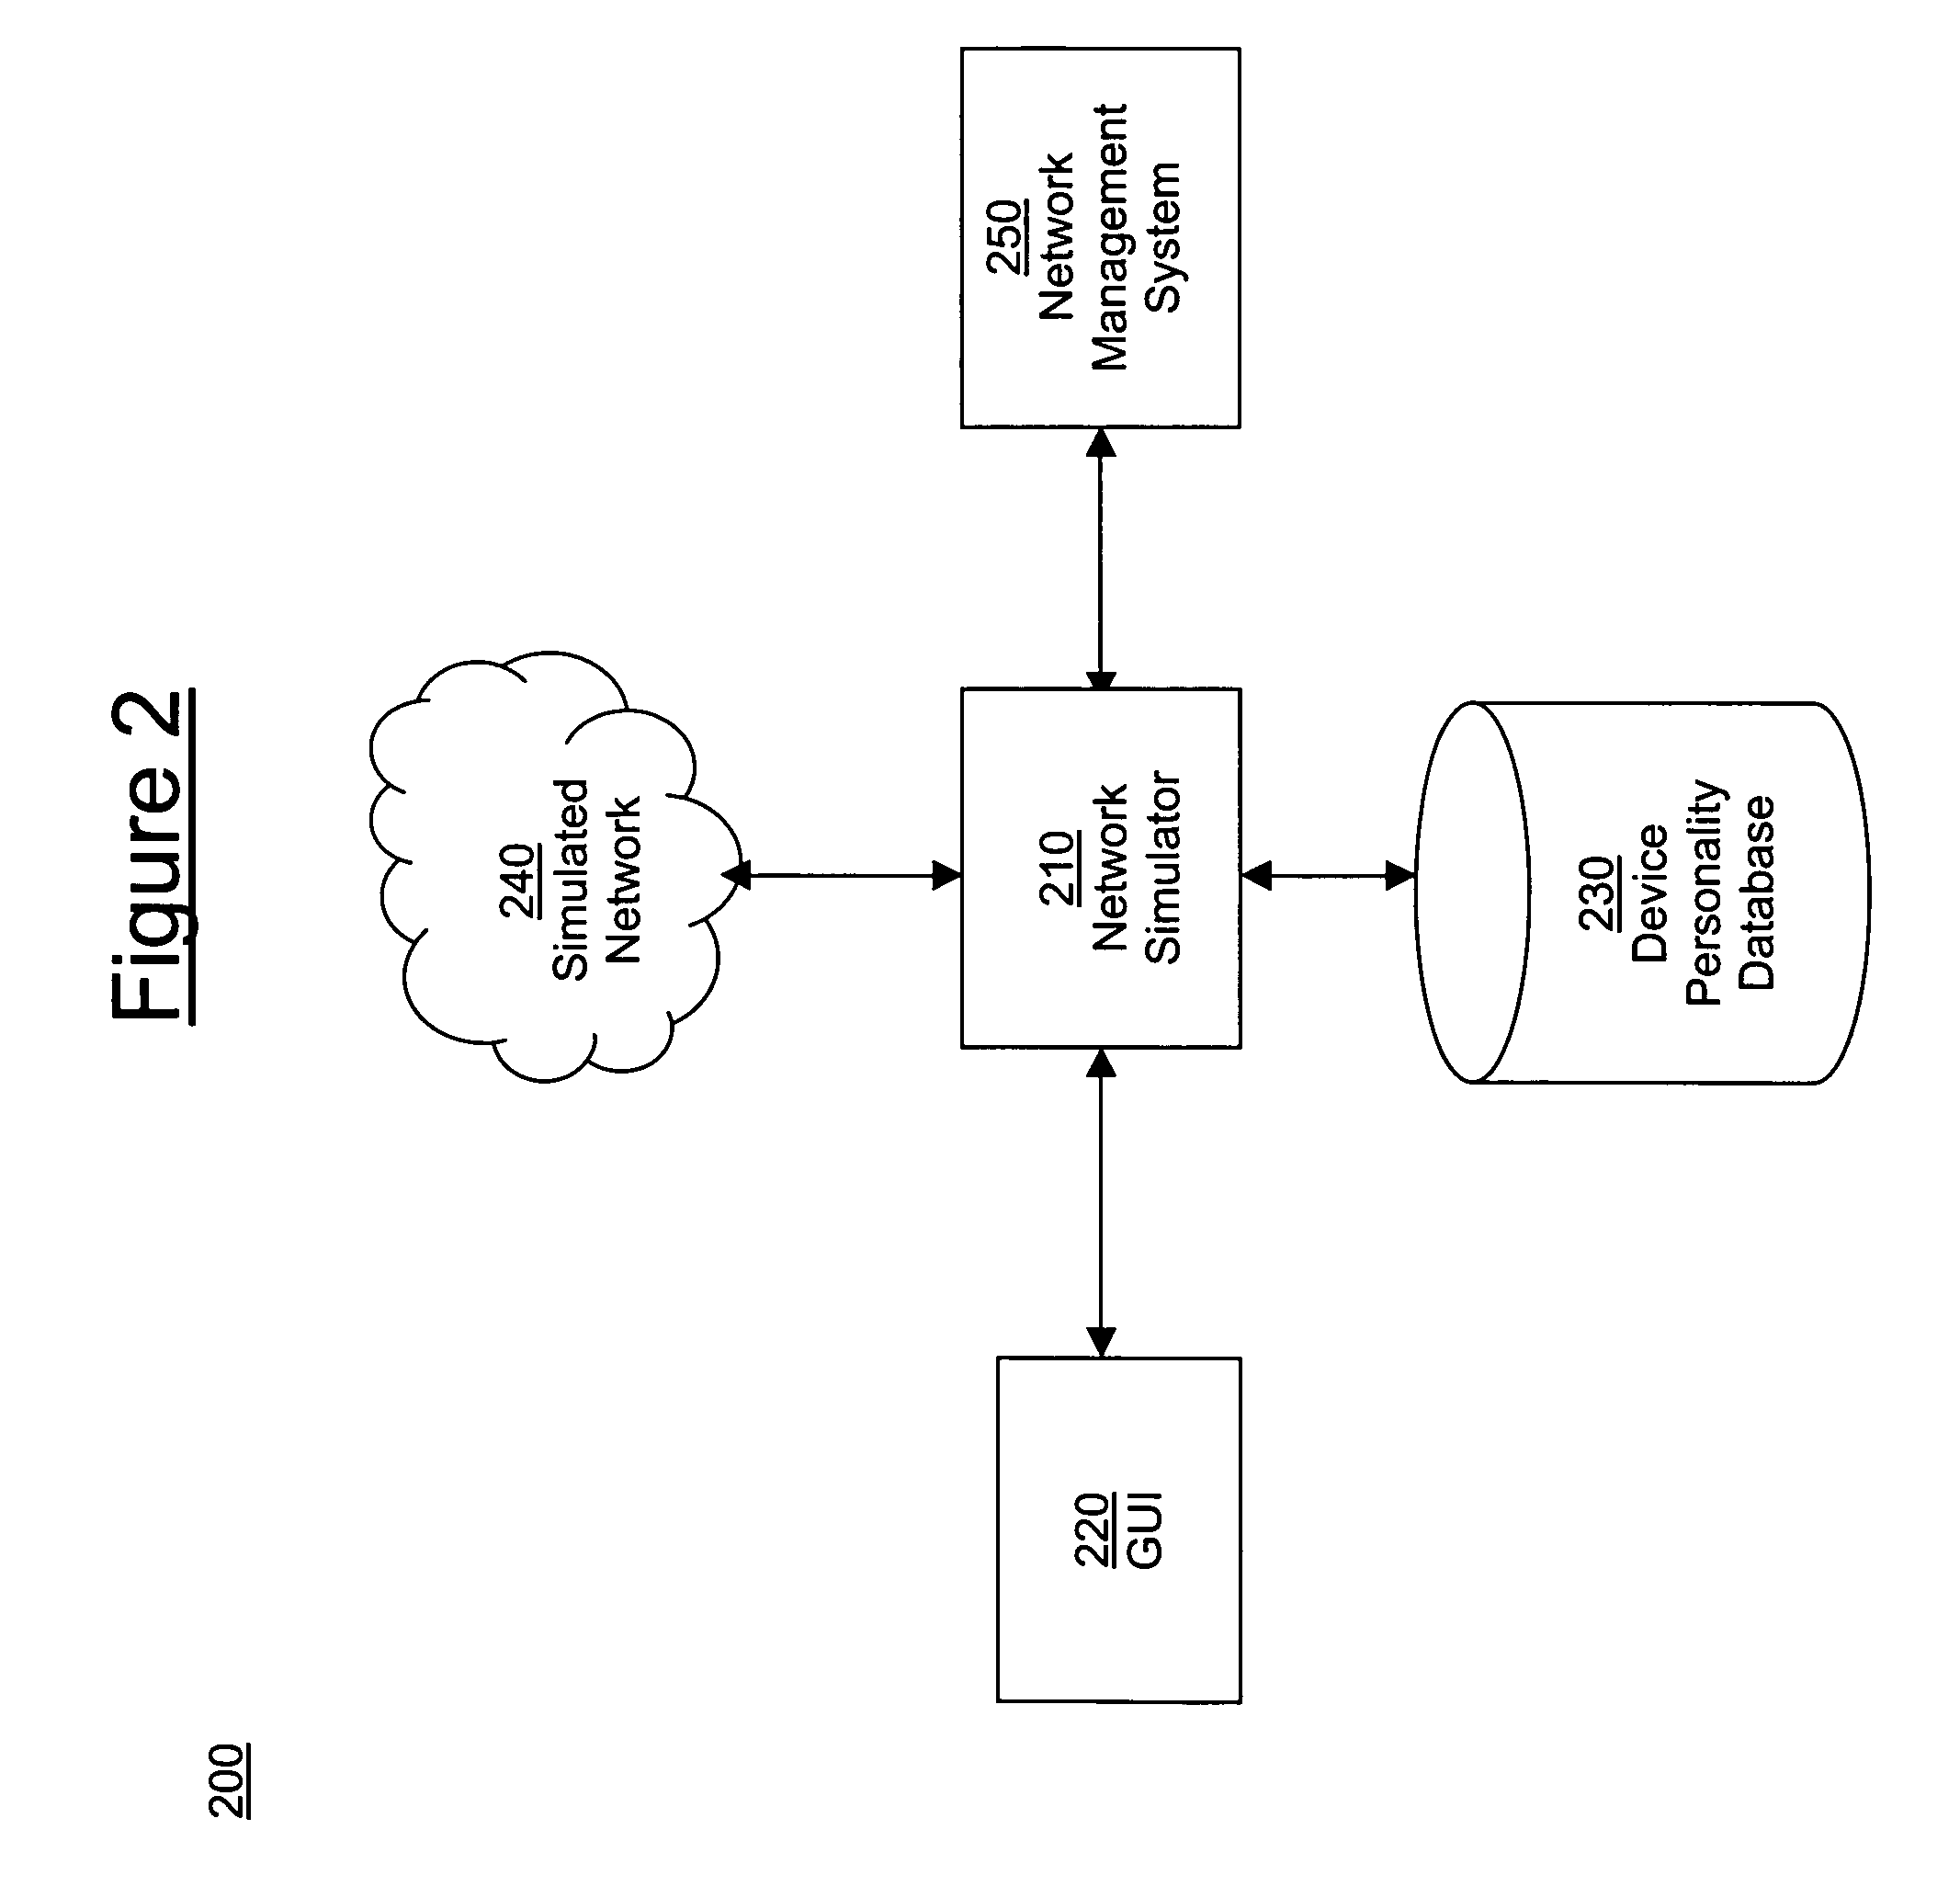 Method for generating a simulated network using a graphical user interface